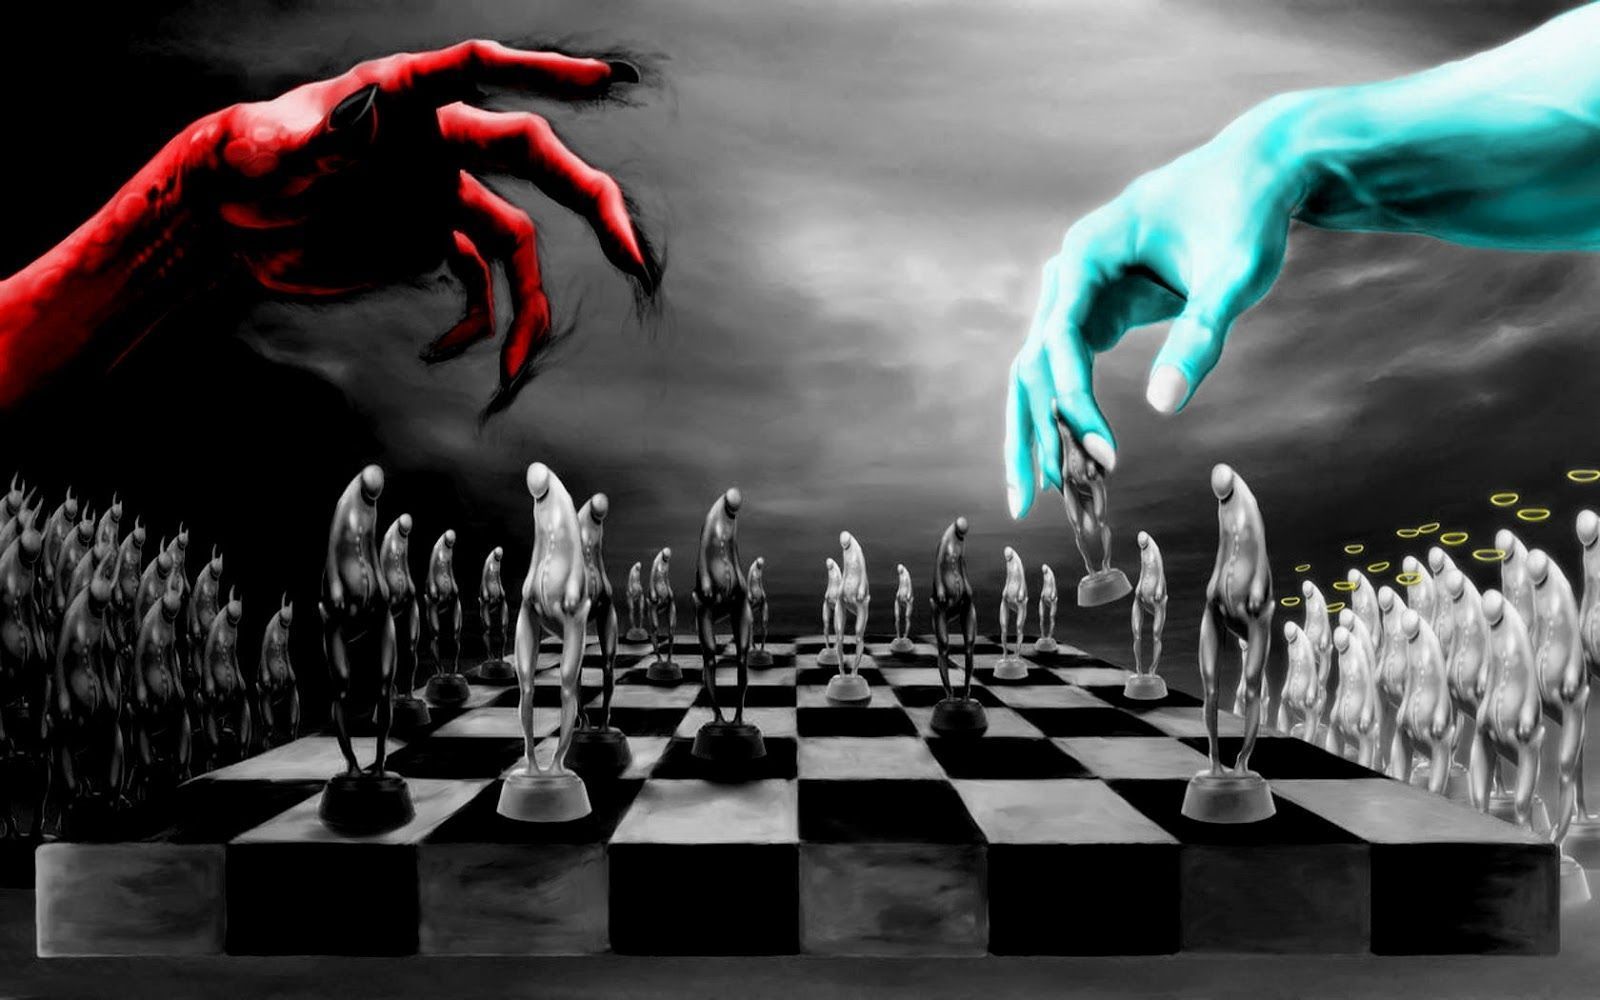 HD wallpapers - Chess wallpapers Living Arts